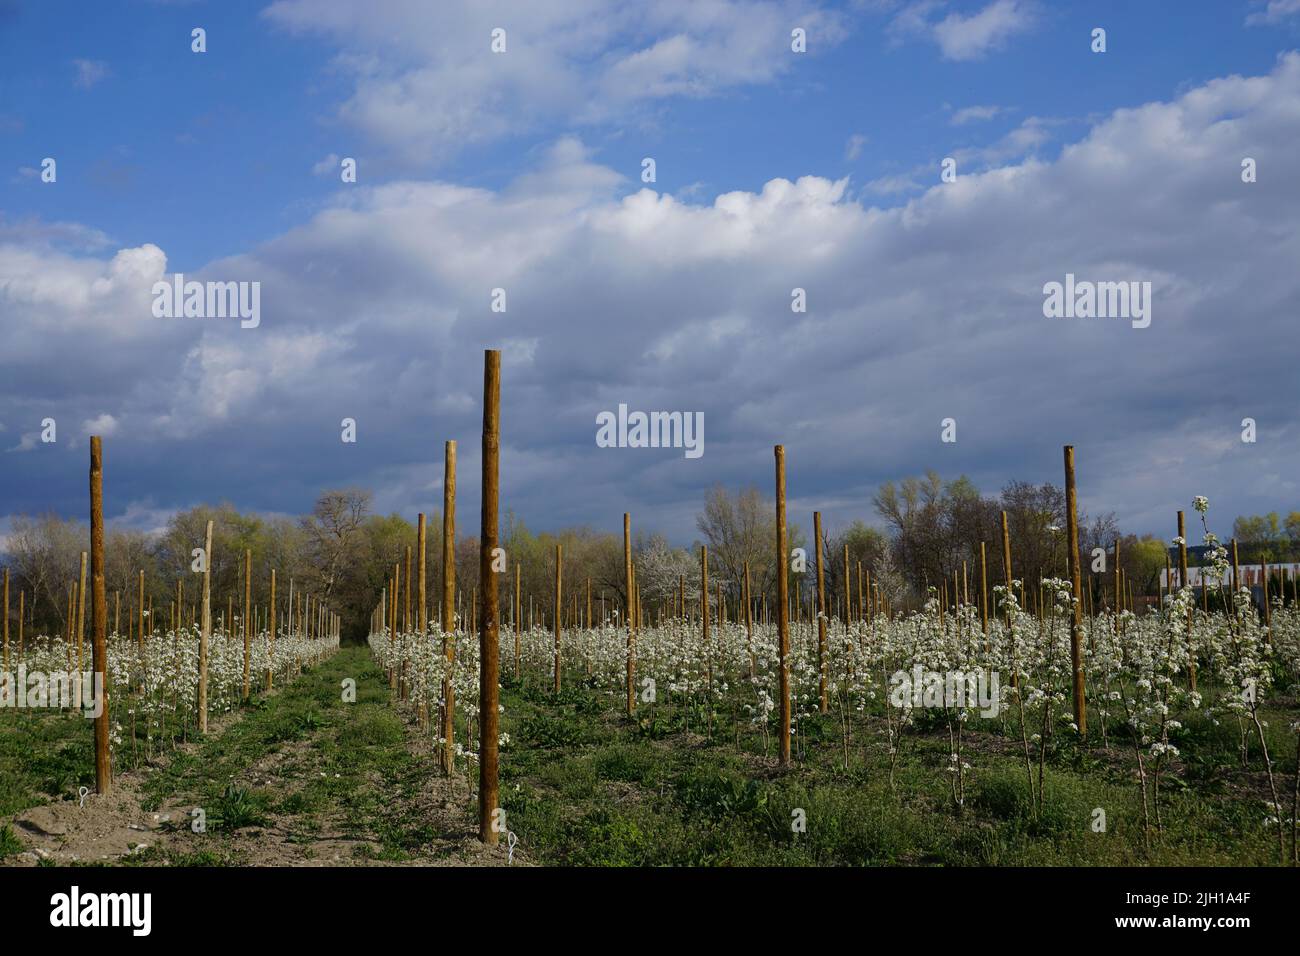 rows of fruits trees in the orchards of the southern alps france in the spring flowering Stock Photo